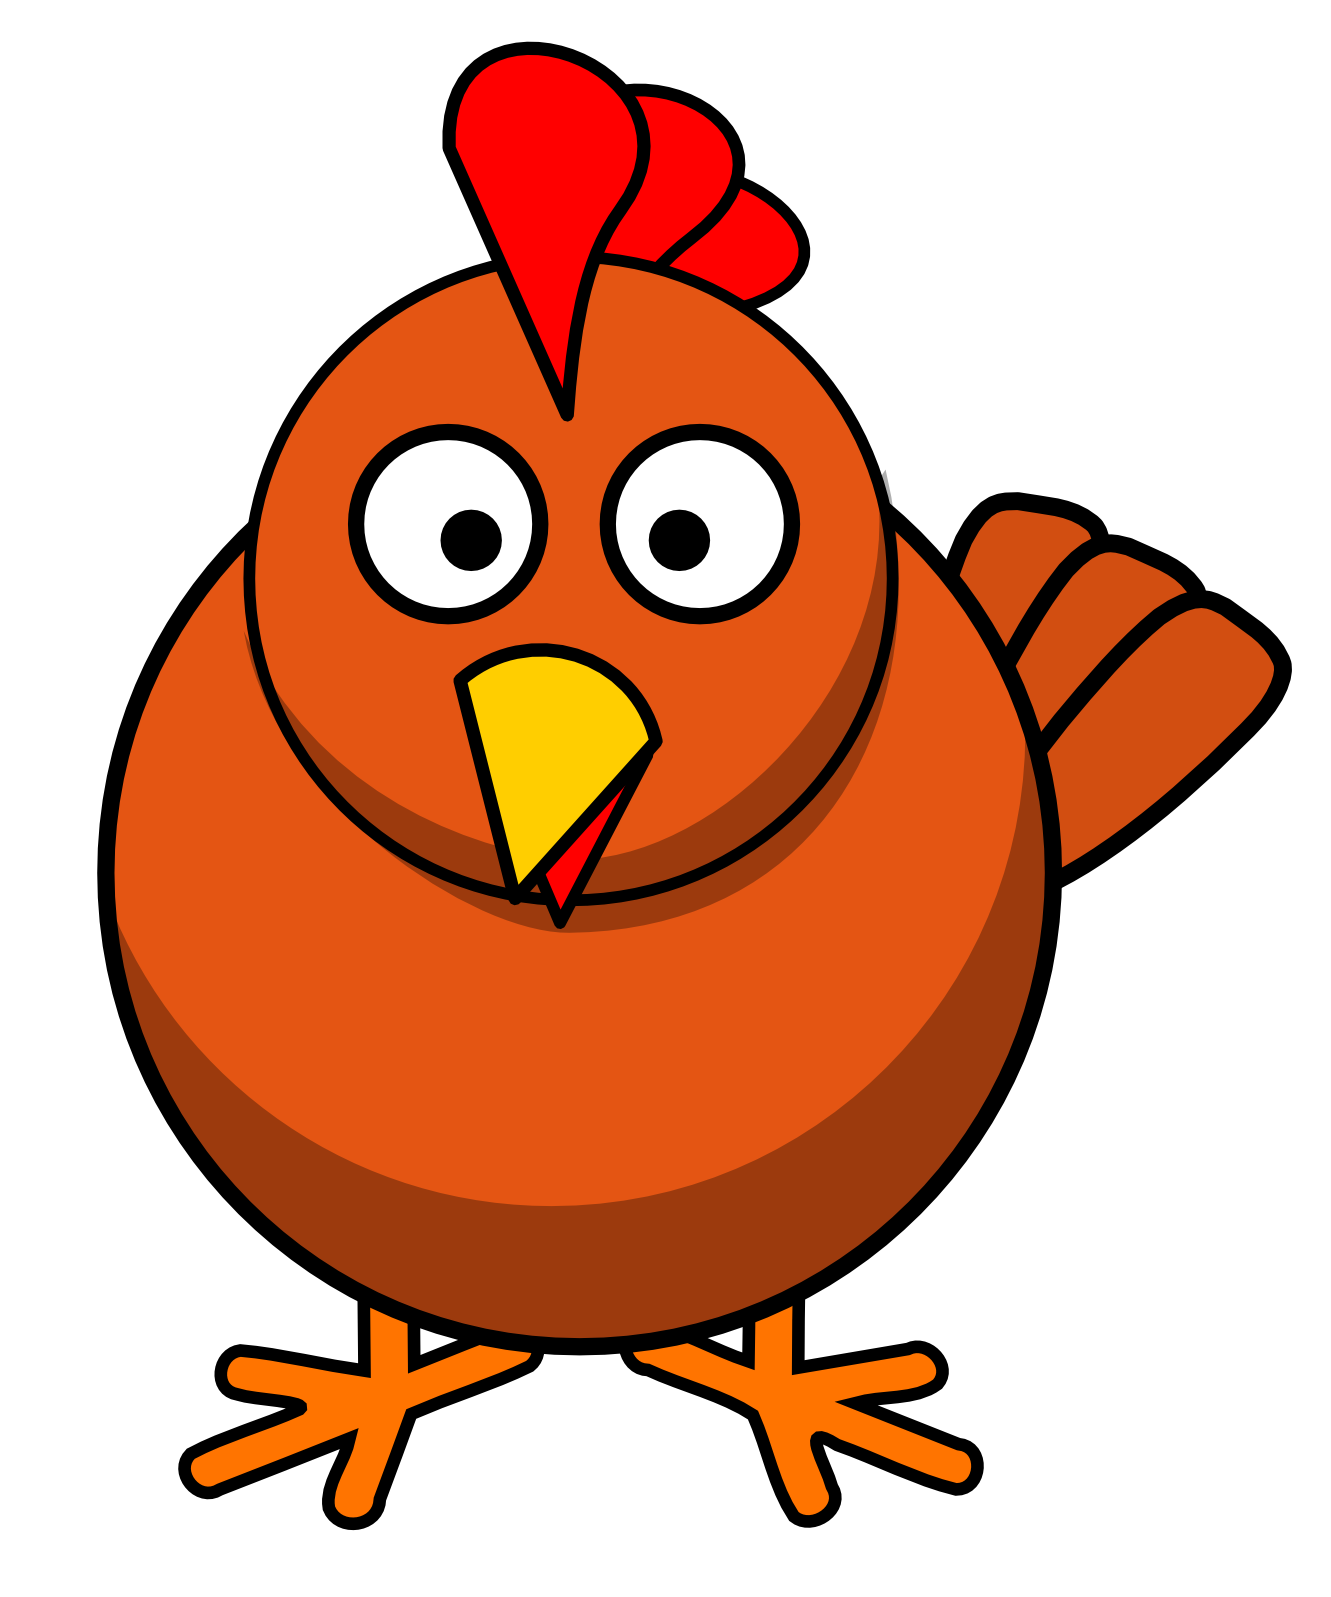 Chicken Egg Clipart | Clipart Panda - Free Clipart Images